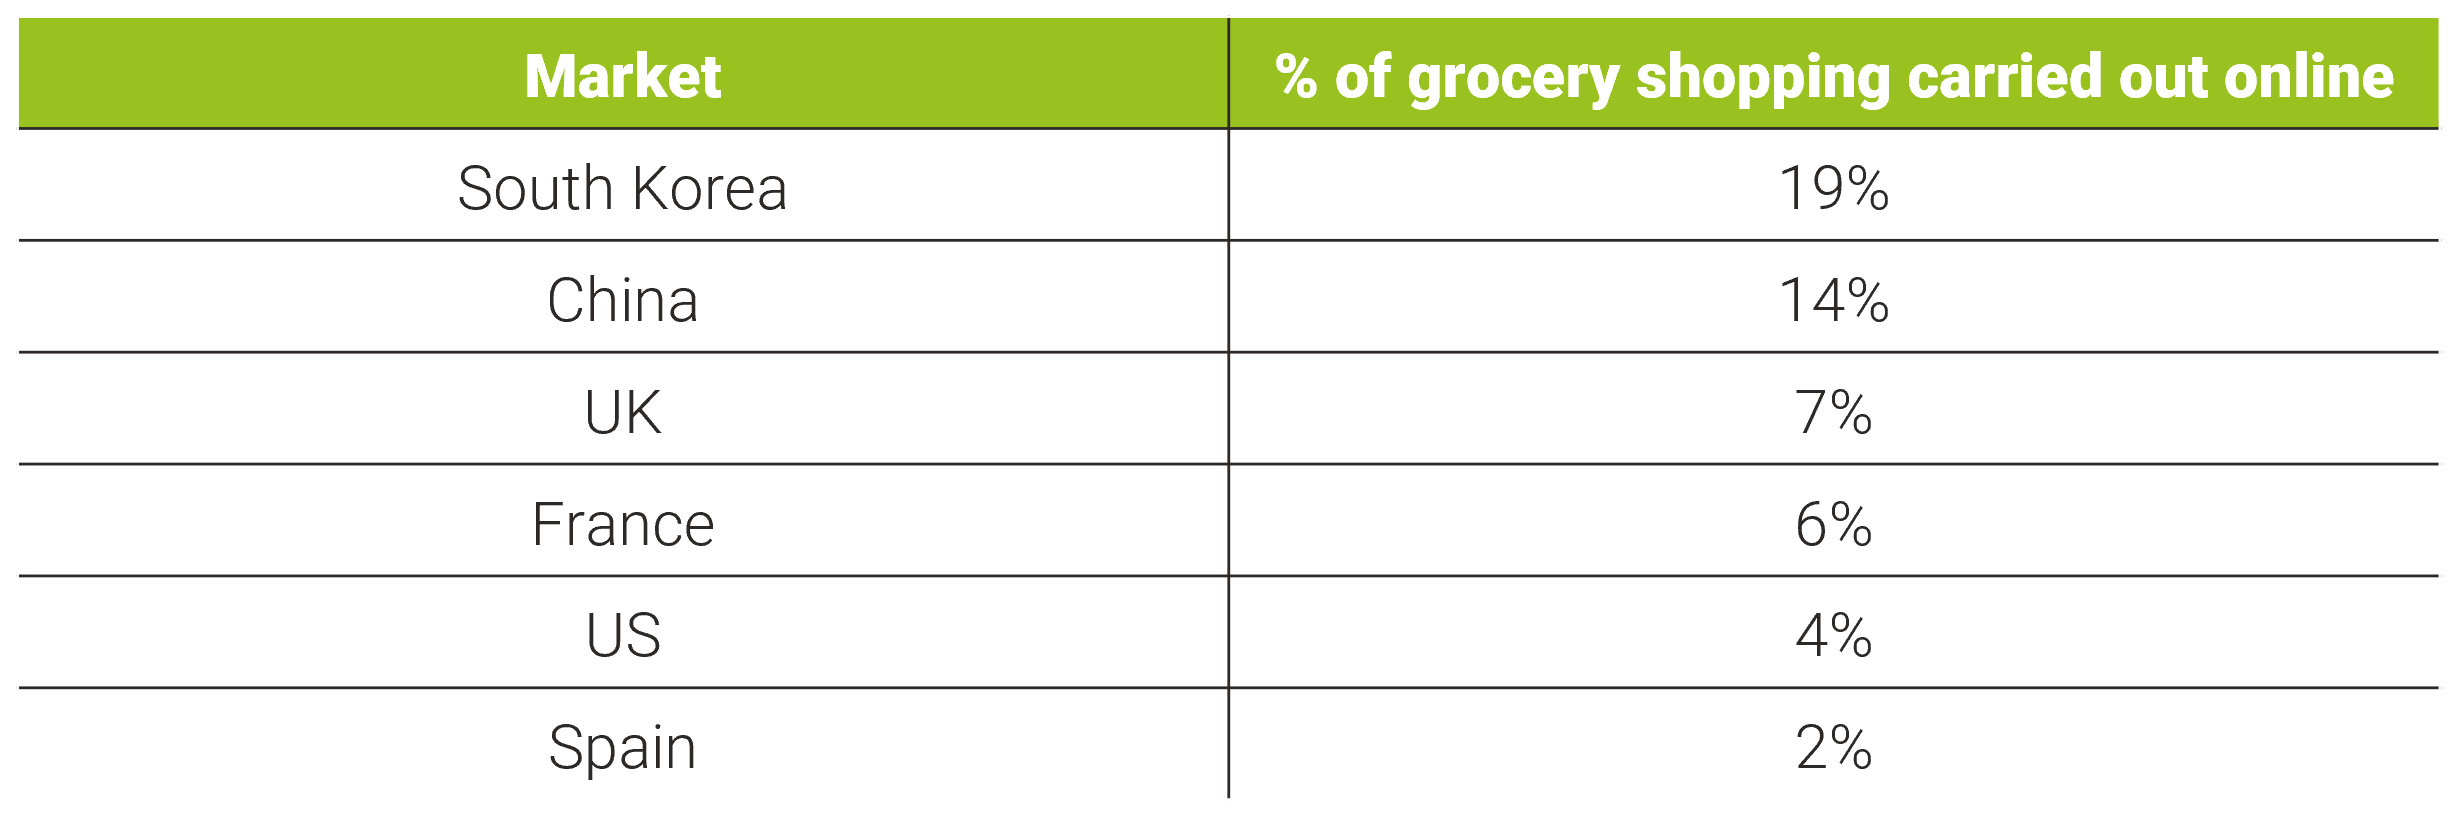 % of grocery shopping carried out online by market